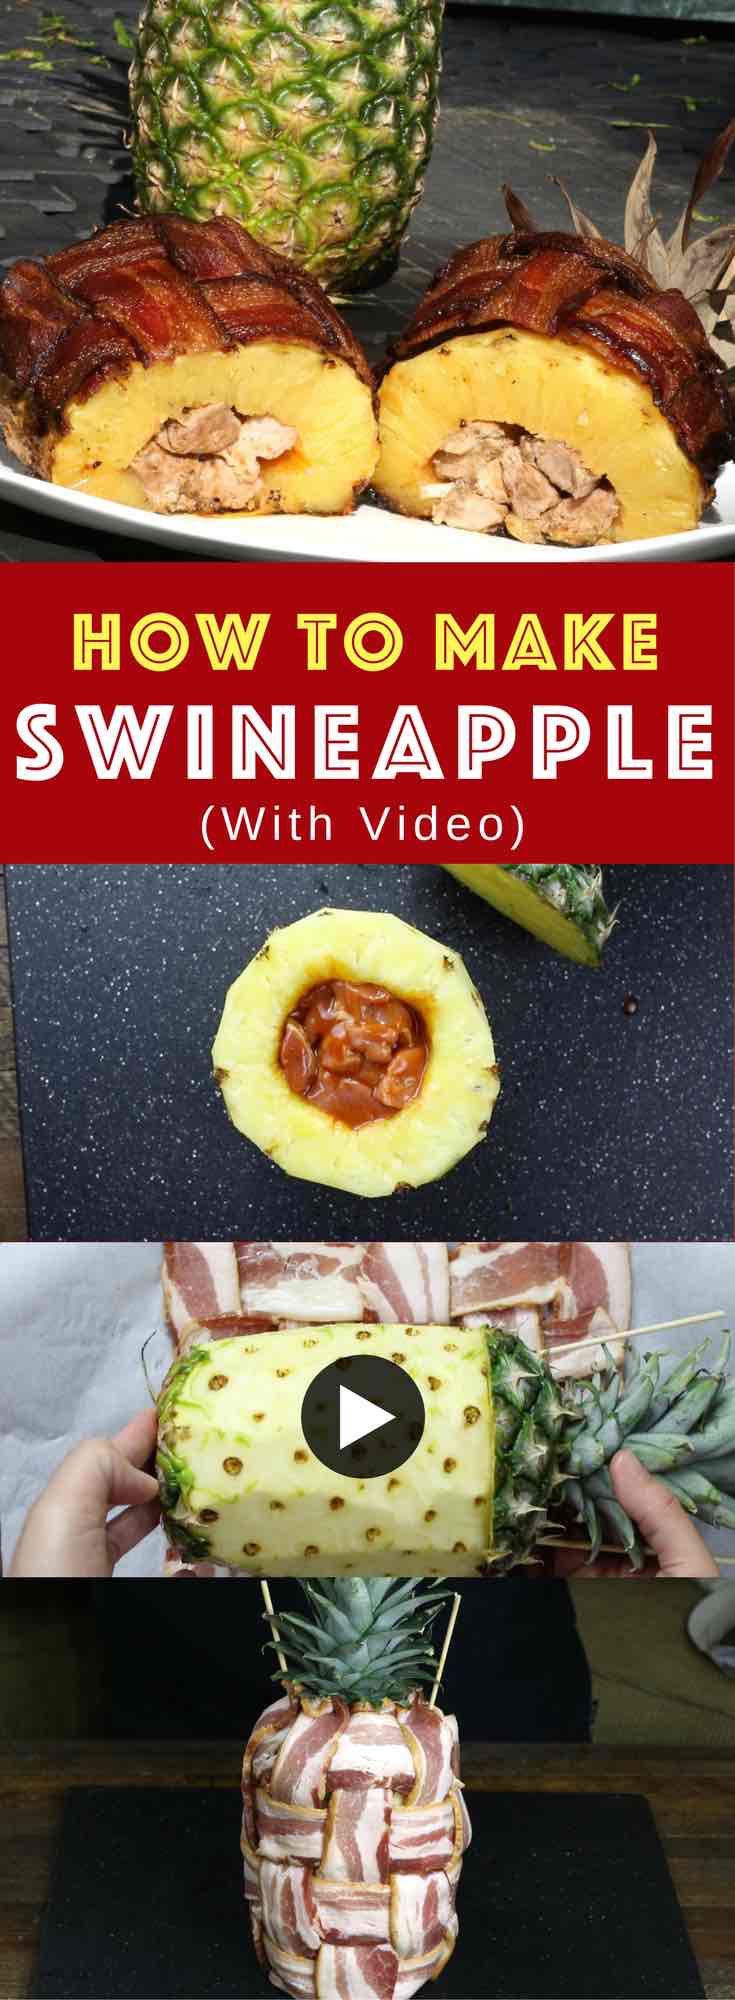 BBQ Swineapple: Pork Stuffed Pineapple Wrapped With Bacon – BBQ Pork Tenderloin stuffed in a pineapple, and then wrapped with bacon. You can grill or bake it! All you need is just a few ingredients: pineapple, bacon, pork tenderloin, BBQ sauce, and paprika. Great for summer BBQ or Father’s Day. Video recipe. | Tipbuzz.com